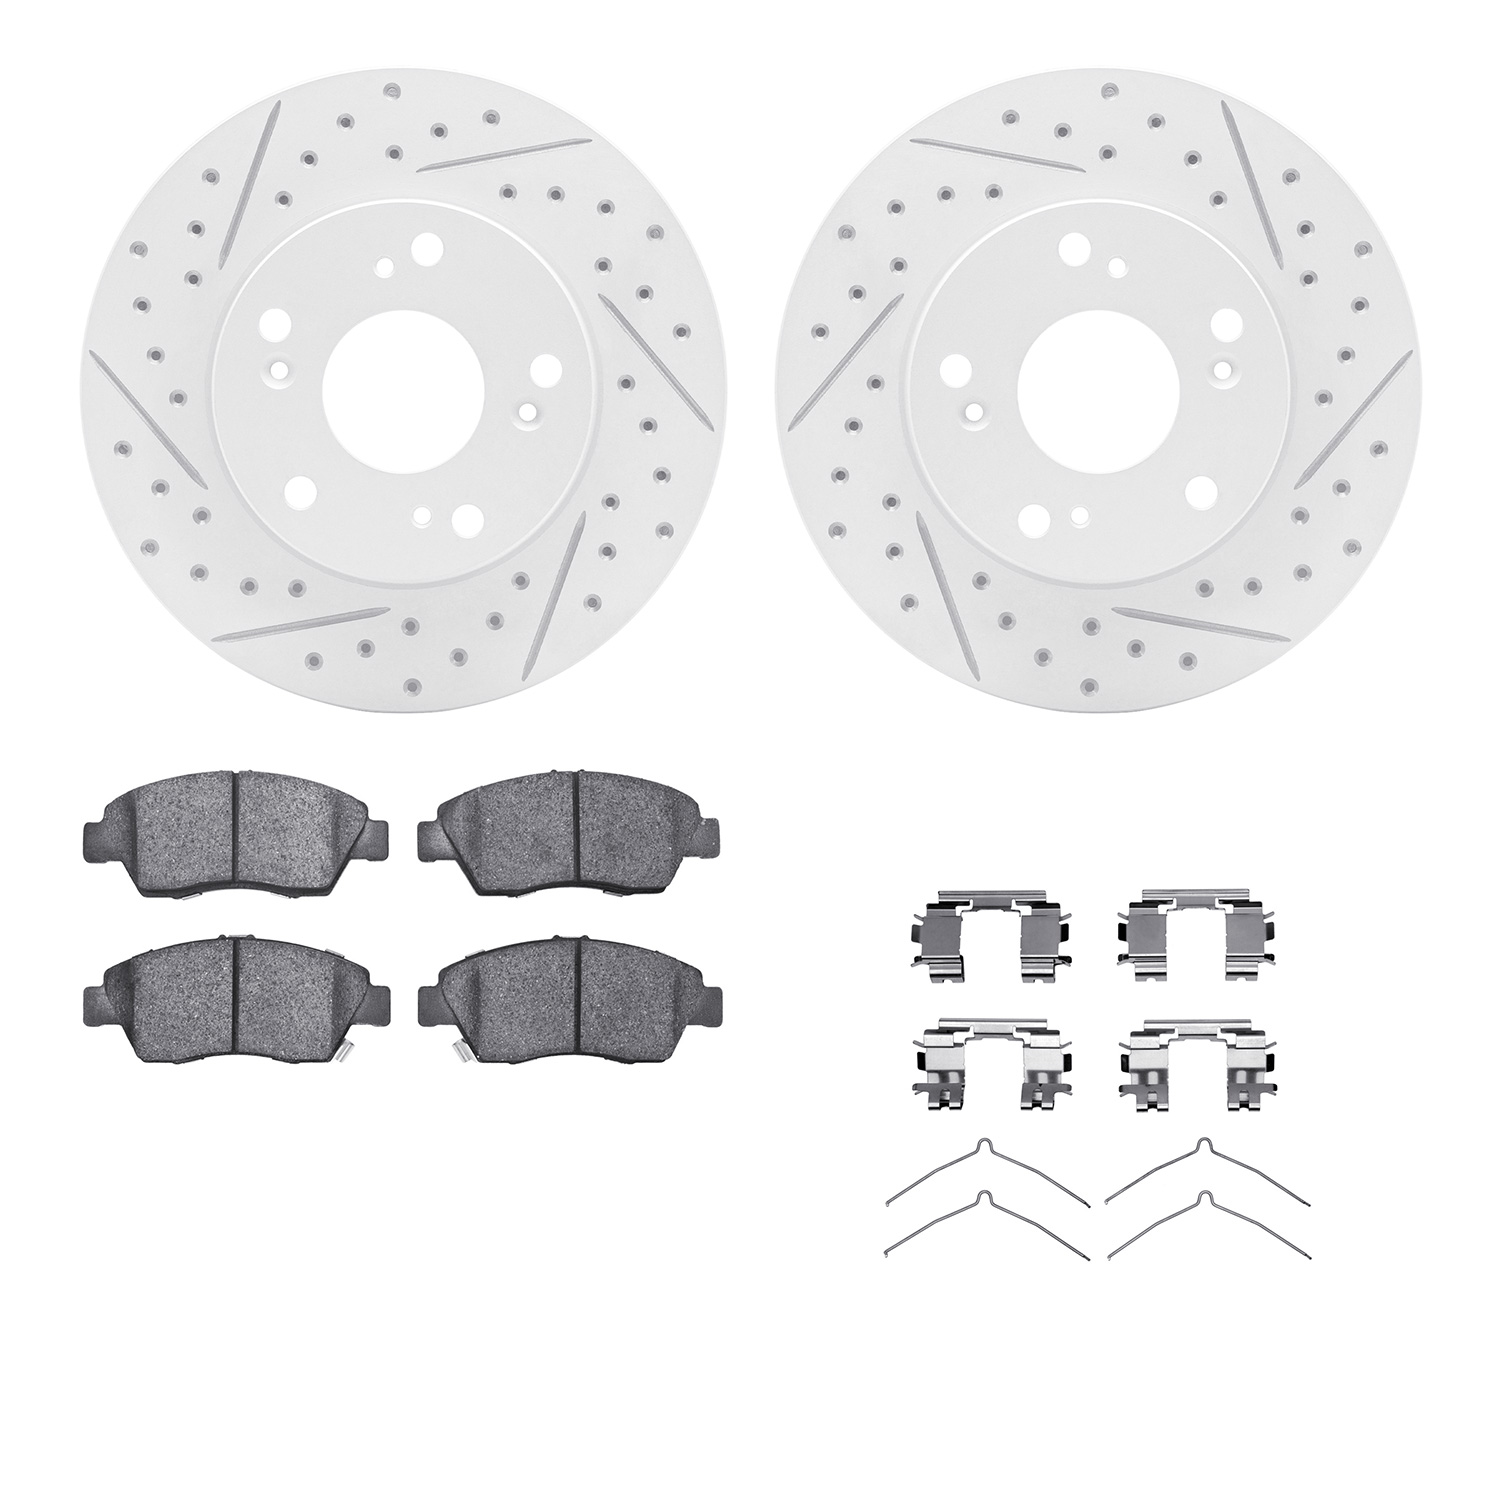 2512-59029 Geoperformance Drilled/Slotted Rotors w/5000 Advanced Brake Pads Kit & Hardware, 2002-2011 Acura/Honda, Position: Fro